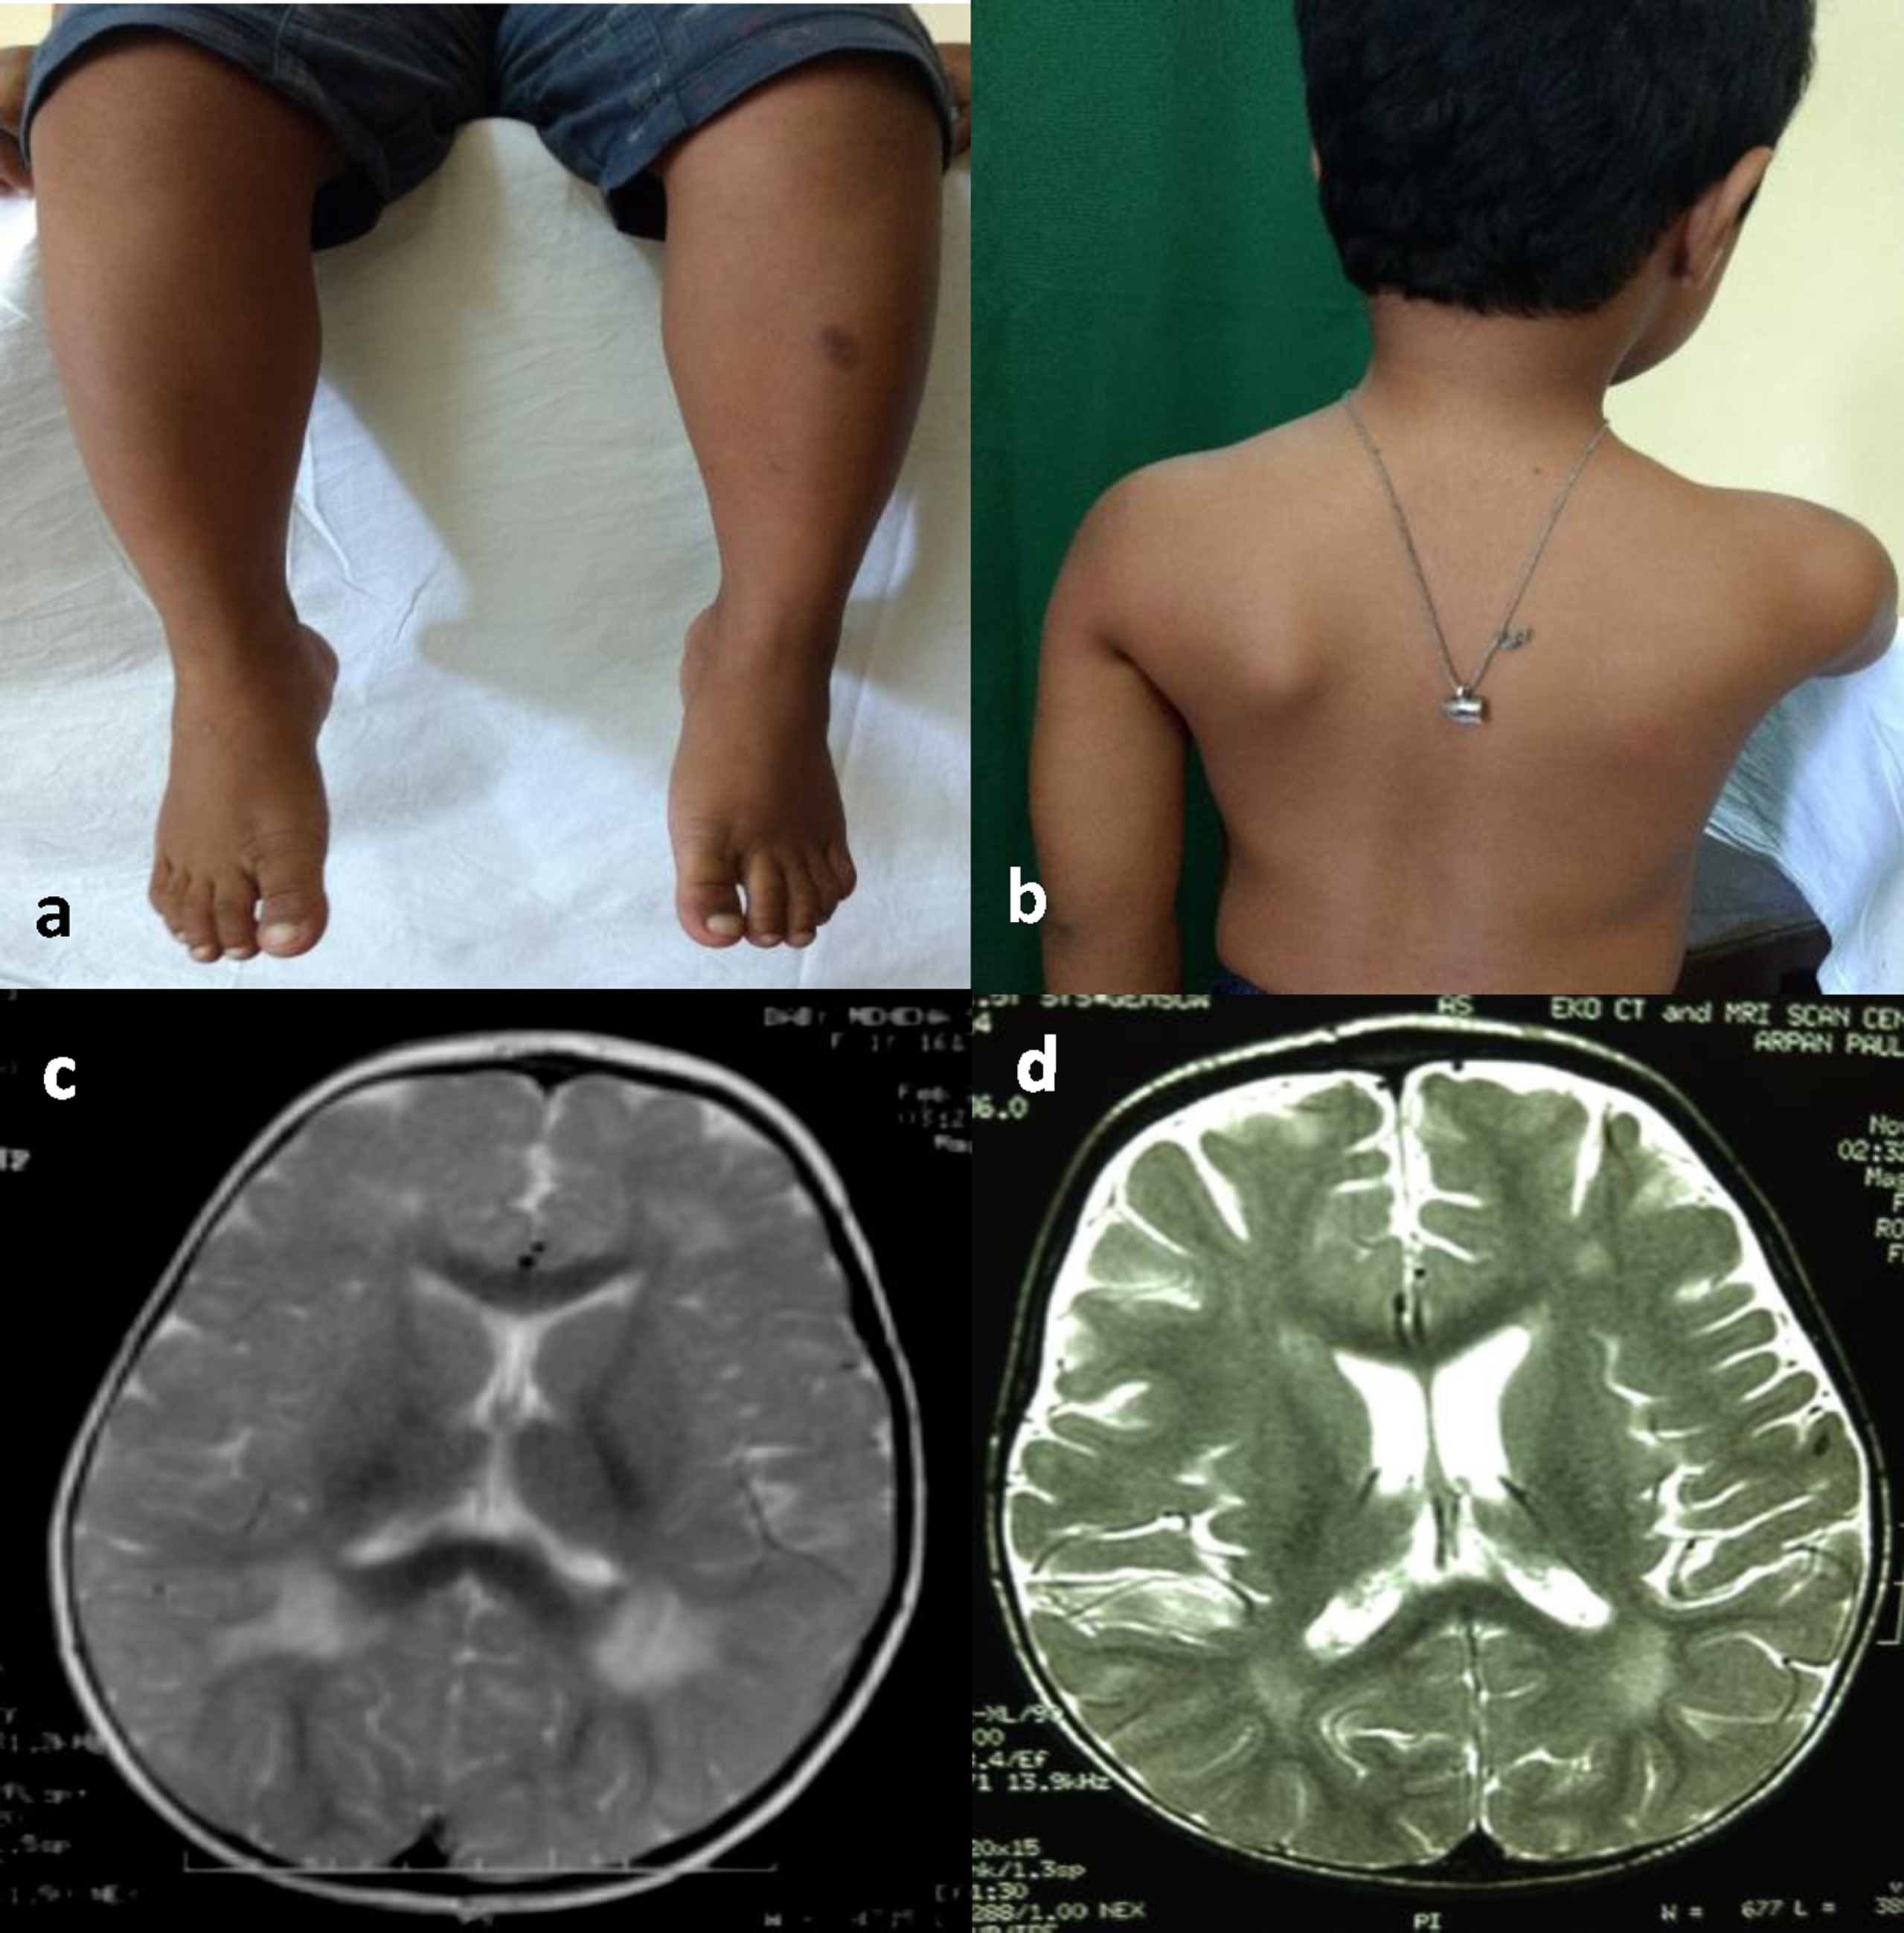 Clinical photographs and MRI images of patients with congenital muscular dystrophy phenotype. a and b: Calf muscle hypertrophy and scapular winging in patient 2 with congenital muscular dystrophy phenotype c and d: Brain MRI showing periventricular white matter T2 hyperintensities in patient 9 (figure c) and patient 2 (figure d) with congenital muscular dystrophy phenotype.